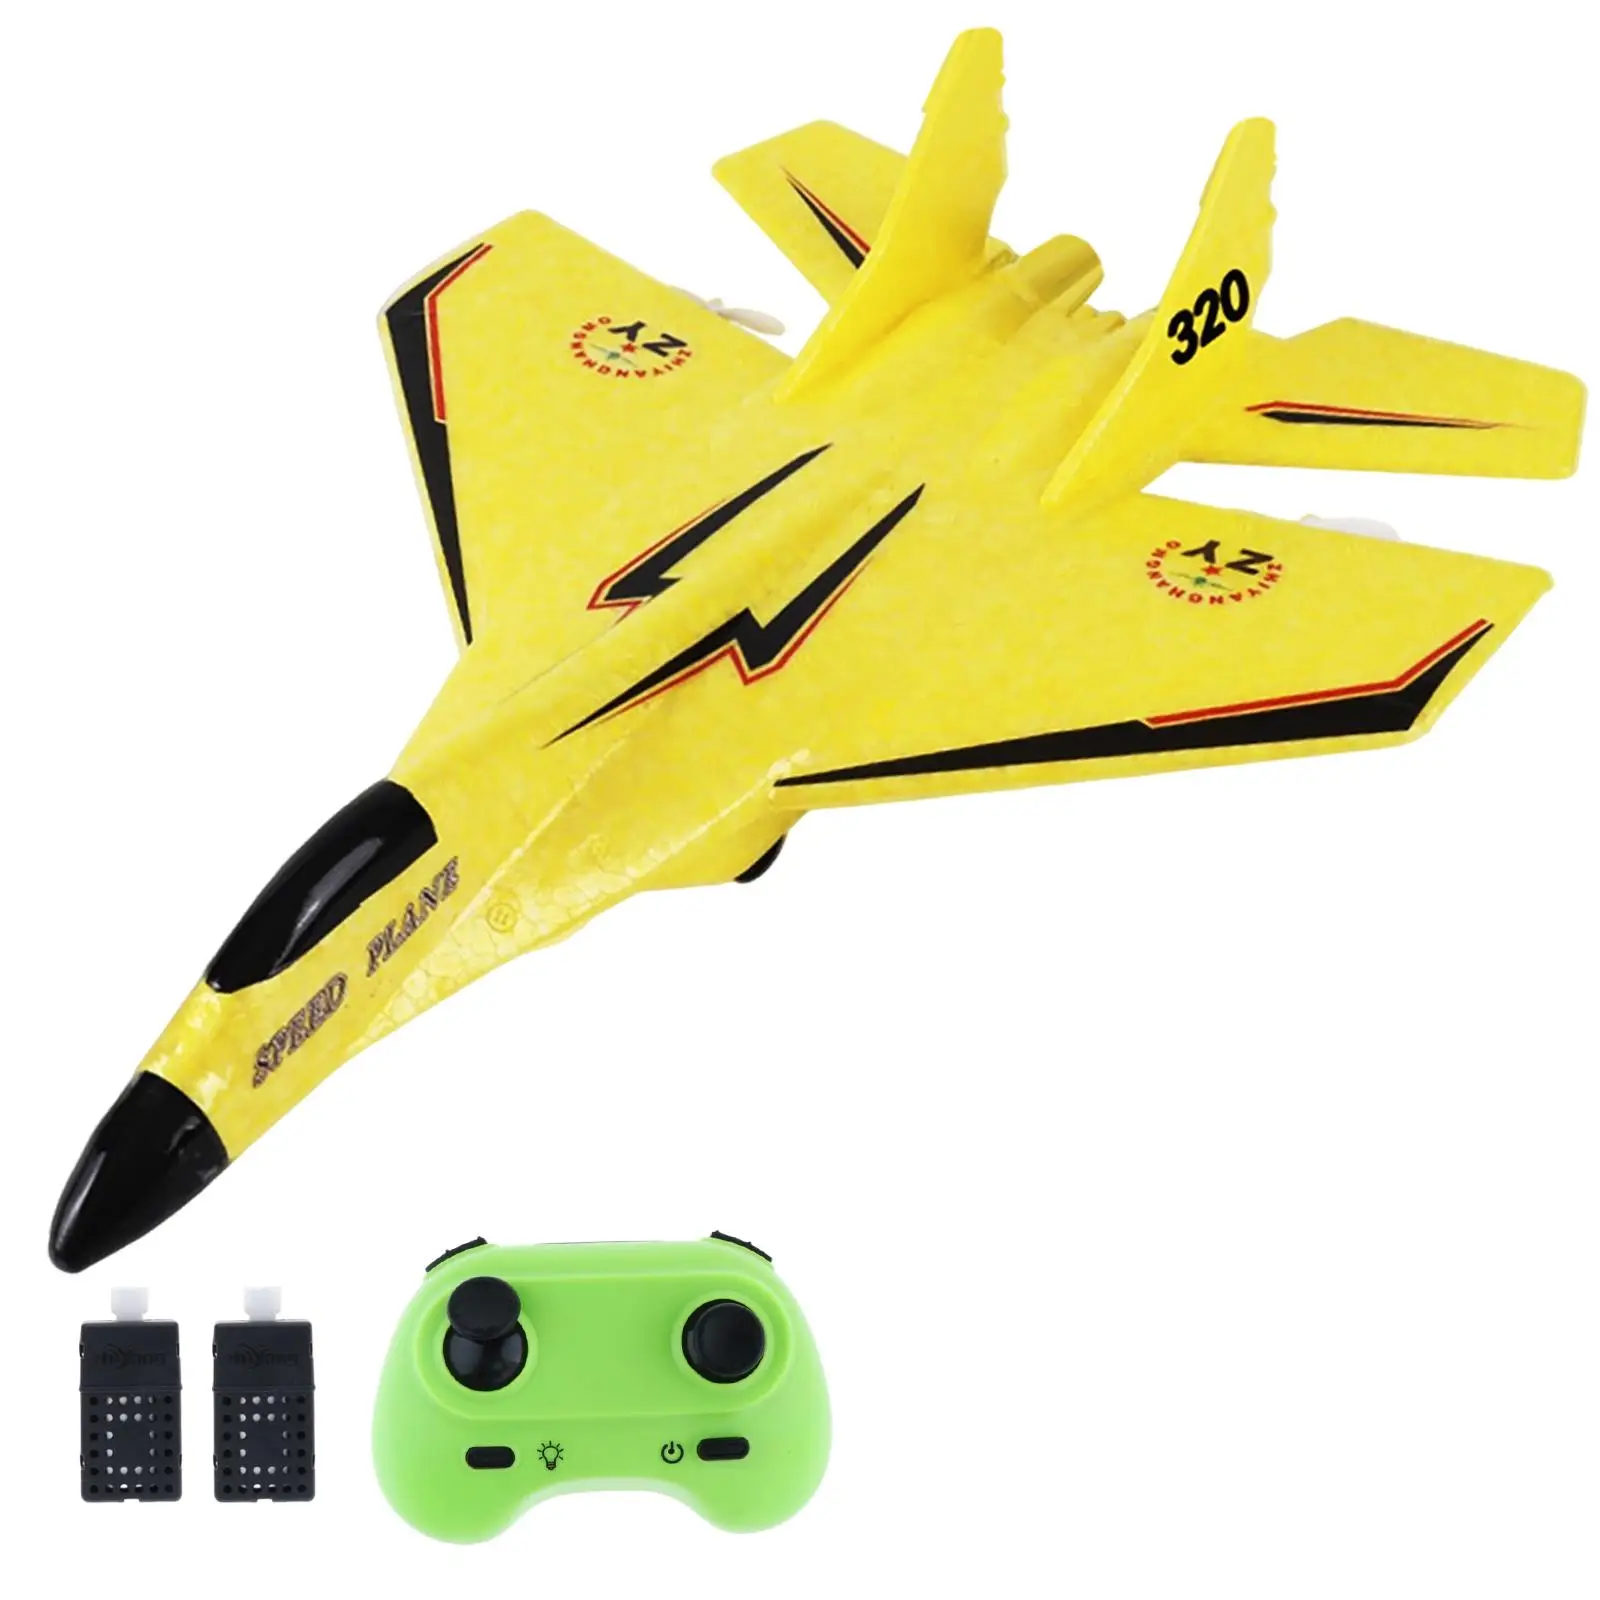 2 CH RC Plane to Control Portable RC Glider Aircraft Foam RC Airplane Remote Control Airplane for Kids Boys Girls Adults